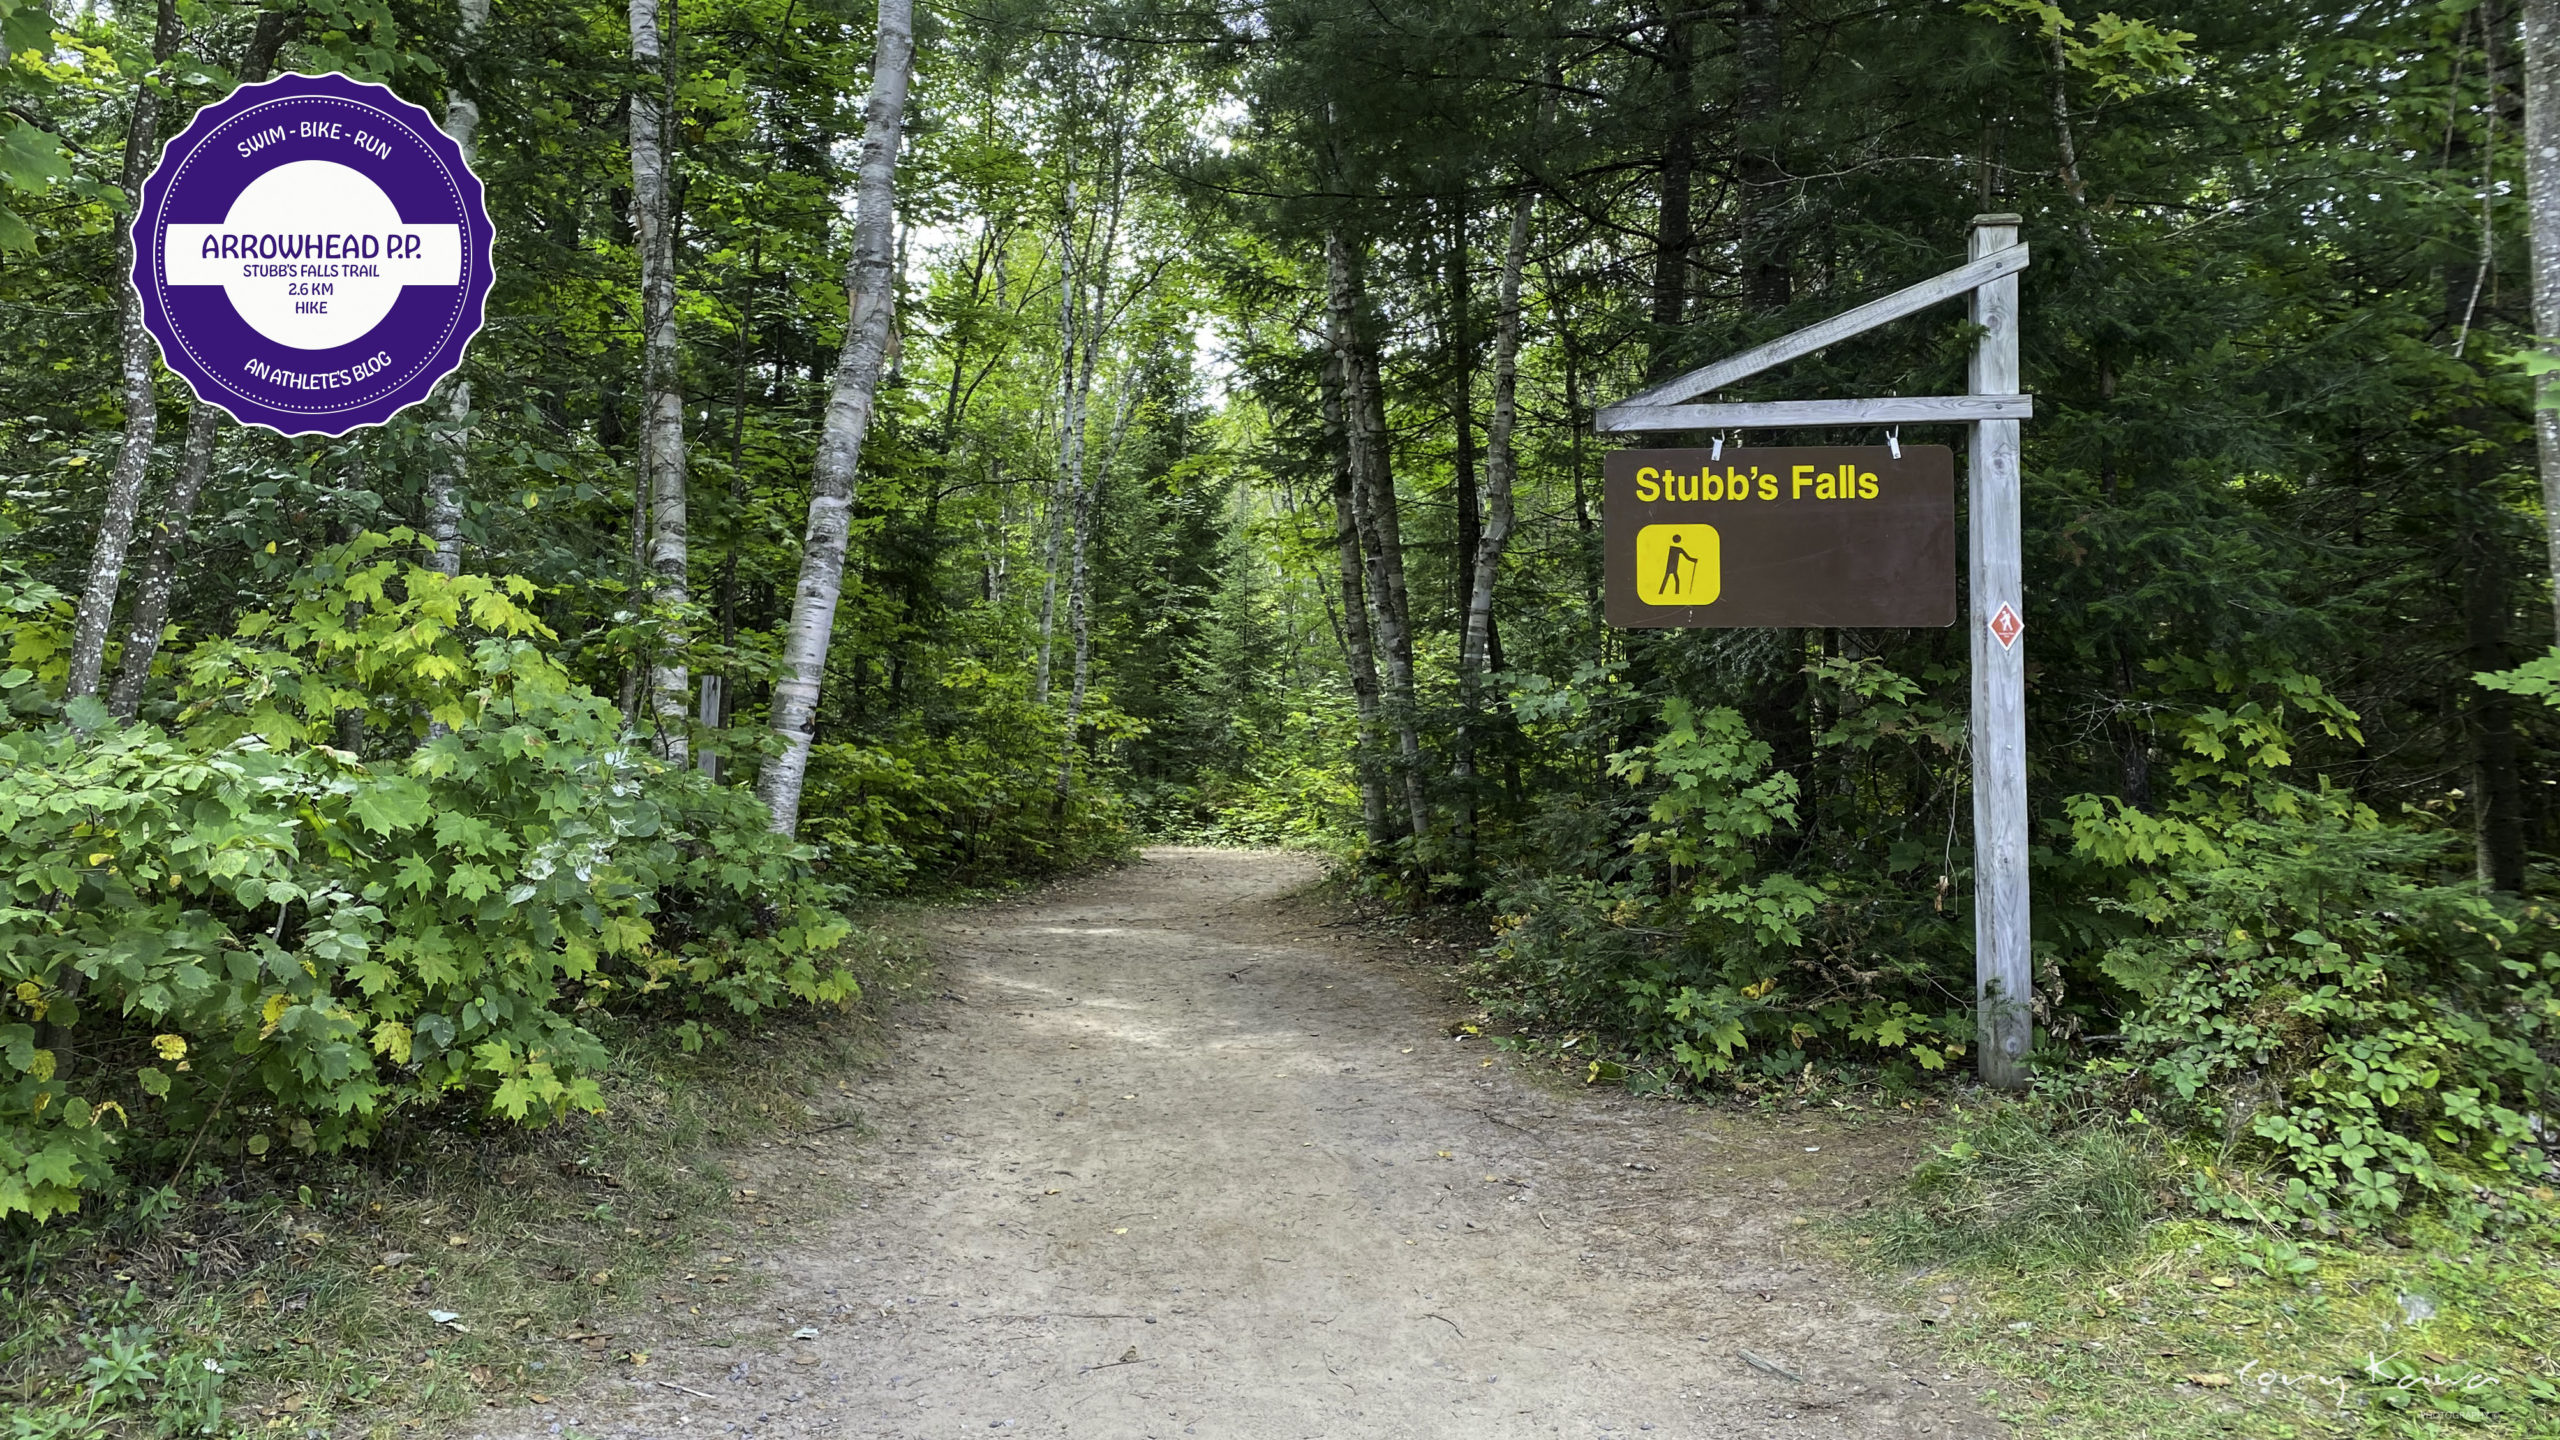 Entering the Stubbs Falls Hiking Trail